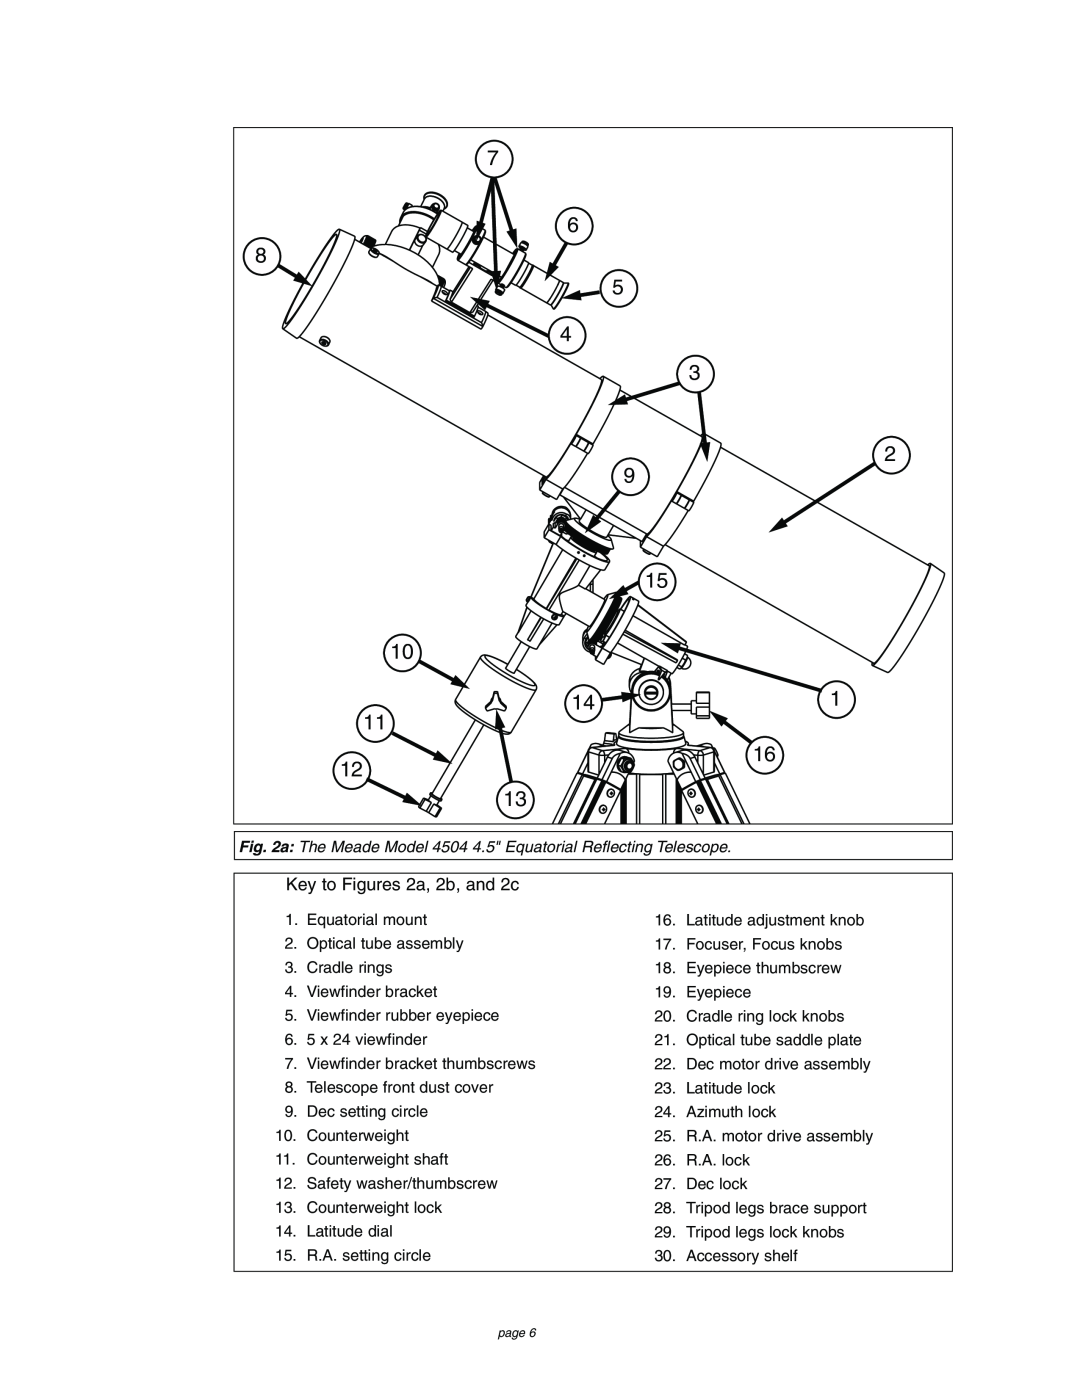 Meade instruction manual Key to Figures 2a, 2b, and 2c, a The Meade Model 4504 4.5 Equatorial Reflecting Telescope 